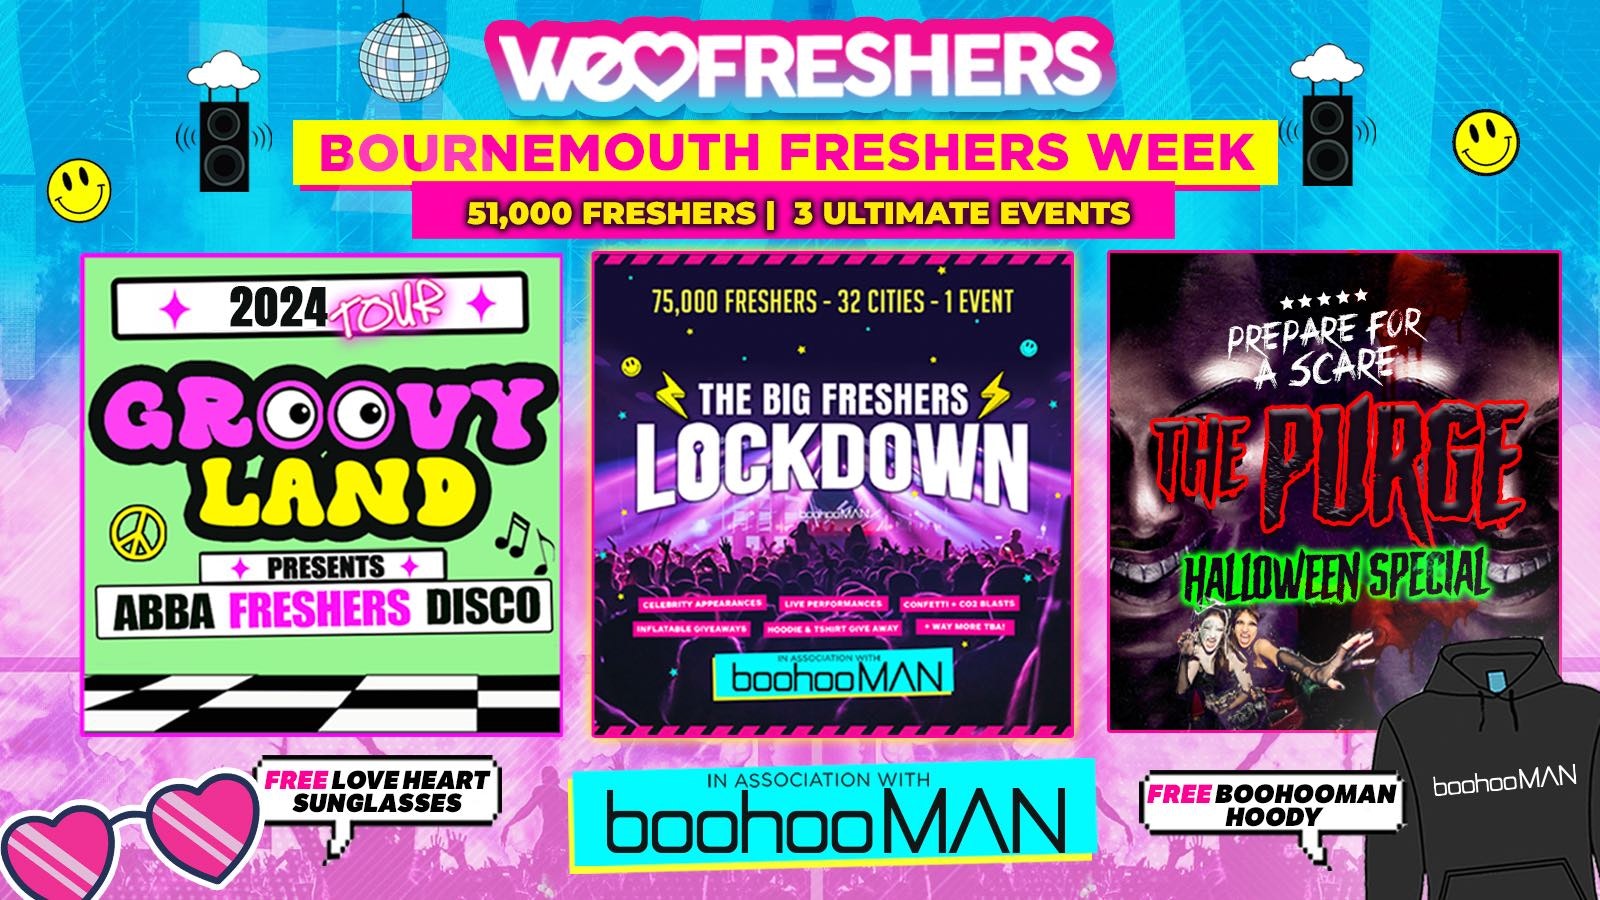 WE LOVE BOURNEMOUTH FRESHERS 2024 in association with boohooMAN – 3 EVENTS❗